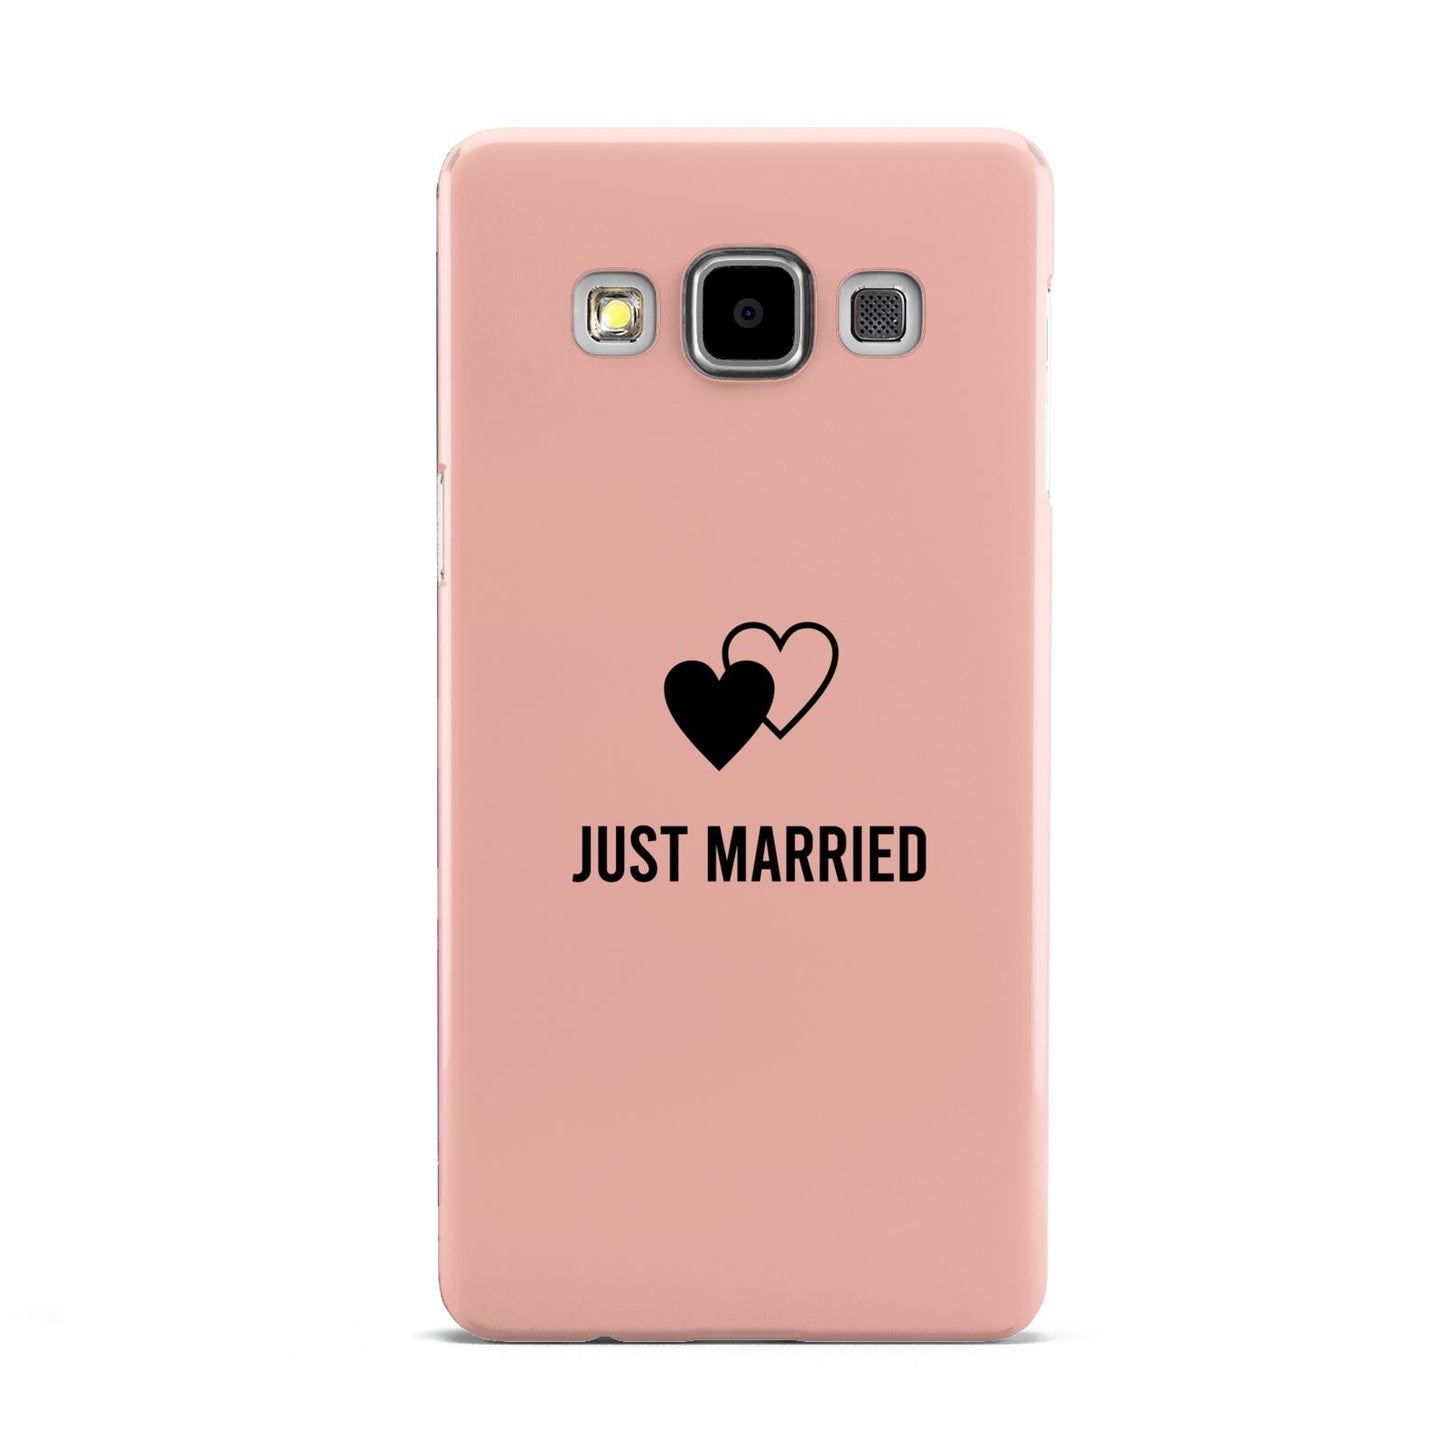 Just Married Samsung Galaxy A5 Case